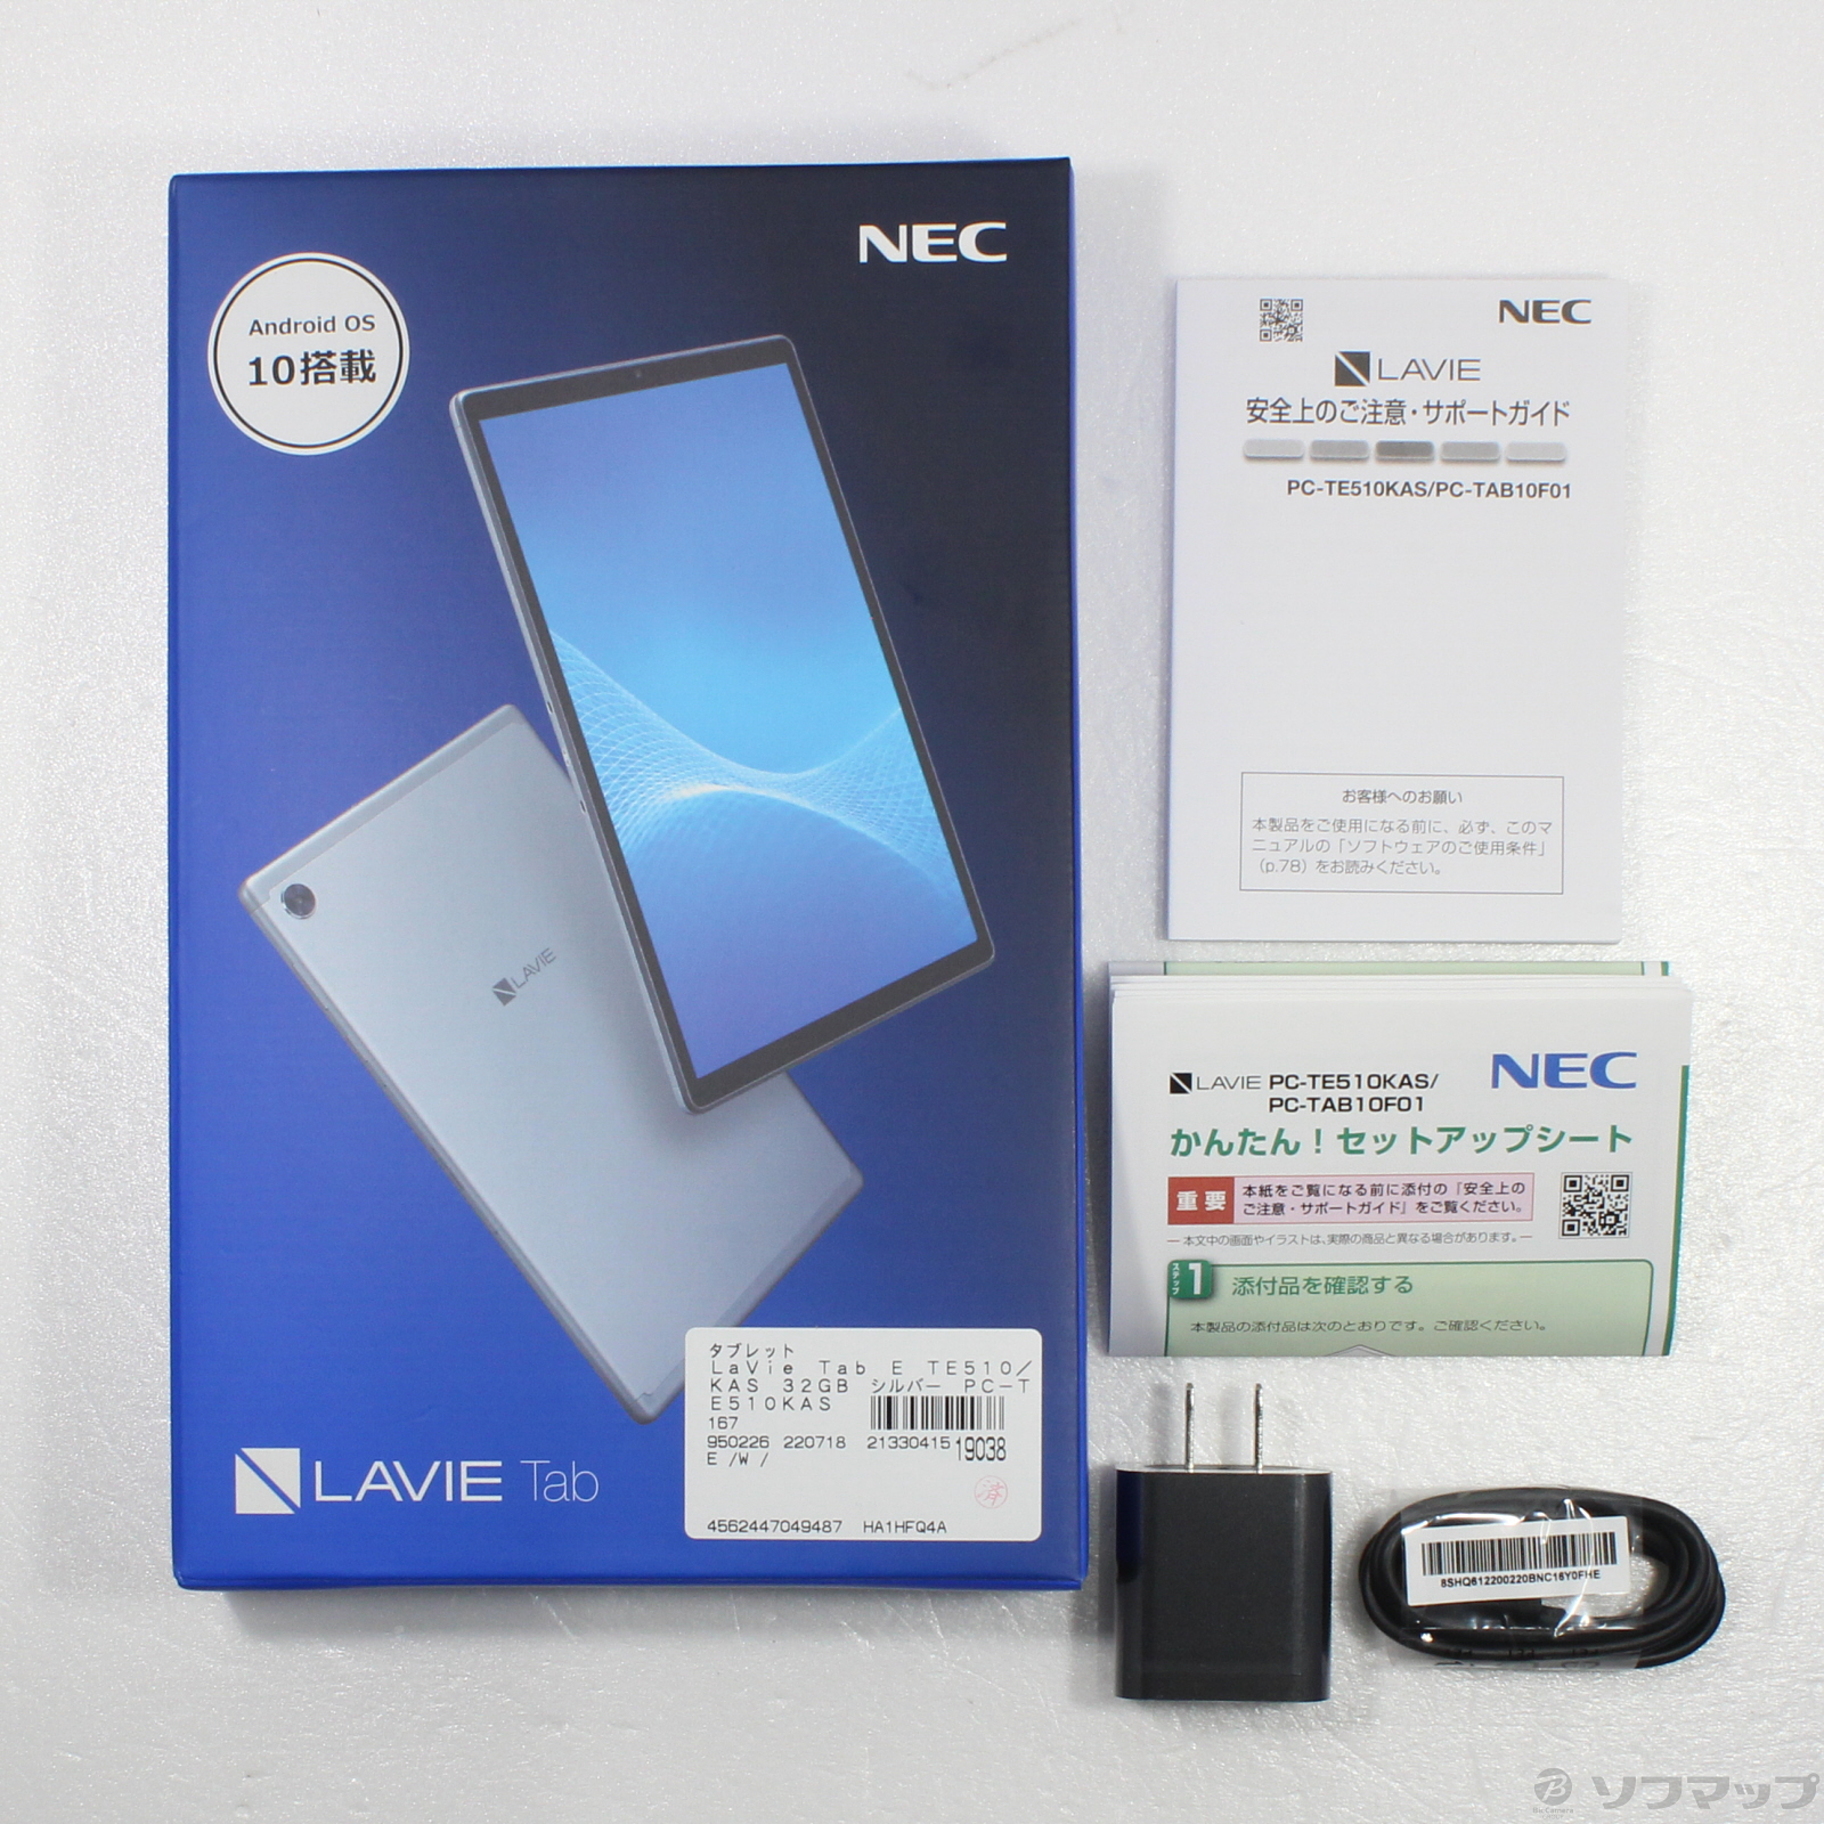 NEC製Androidタブレット TE510/KAS PC-TE510KAS - タブレット